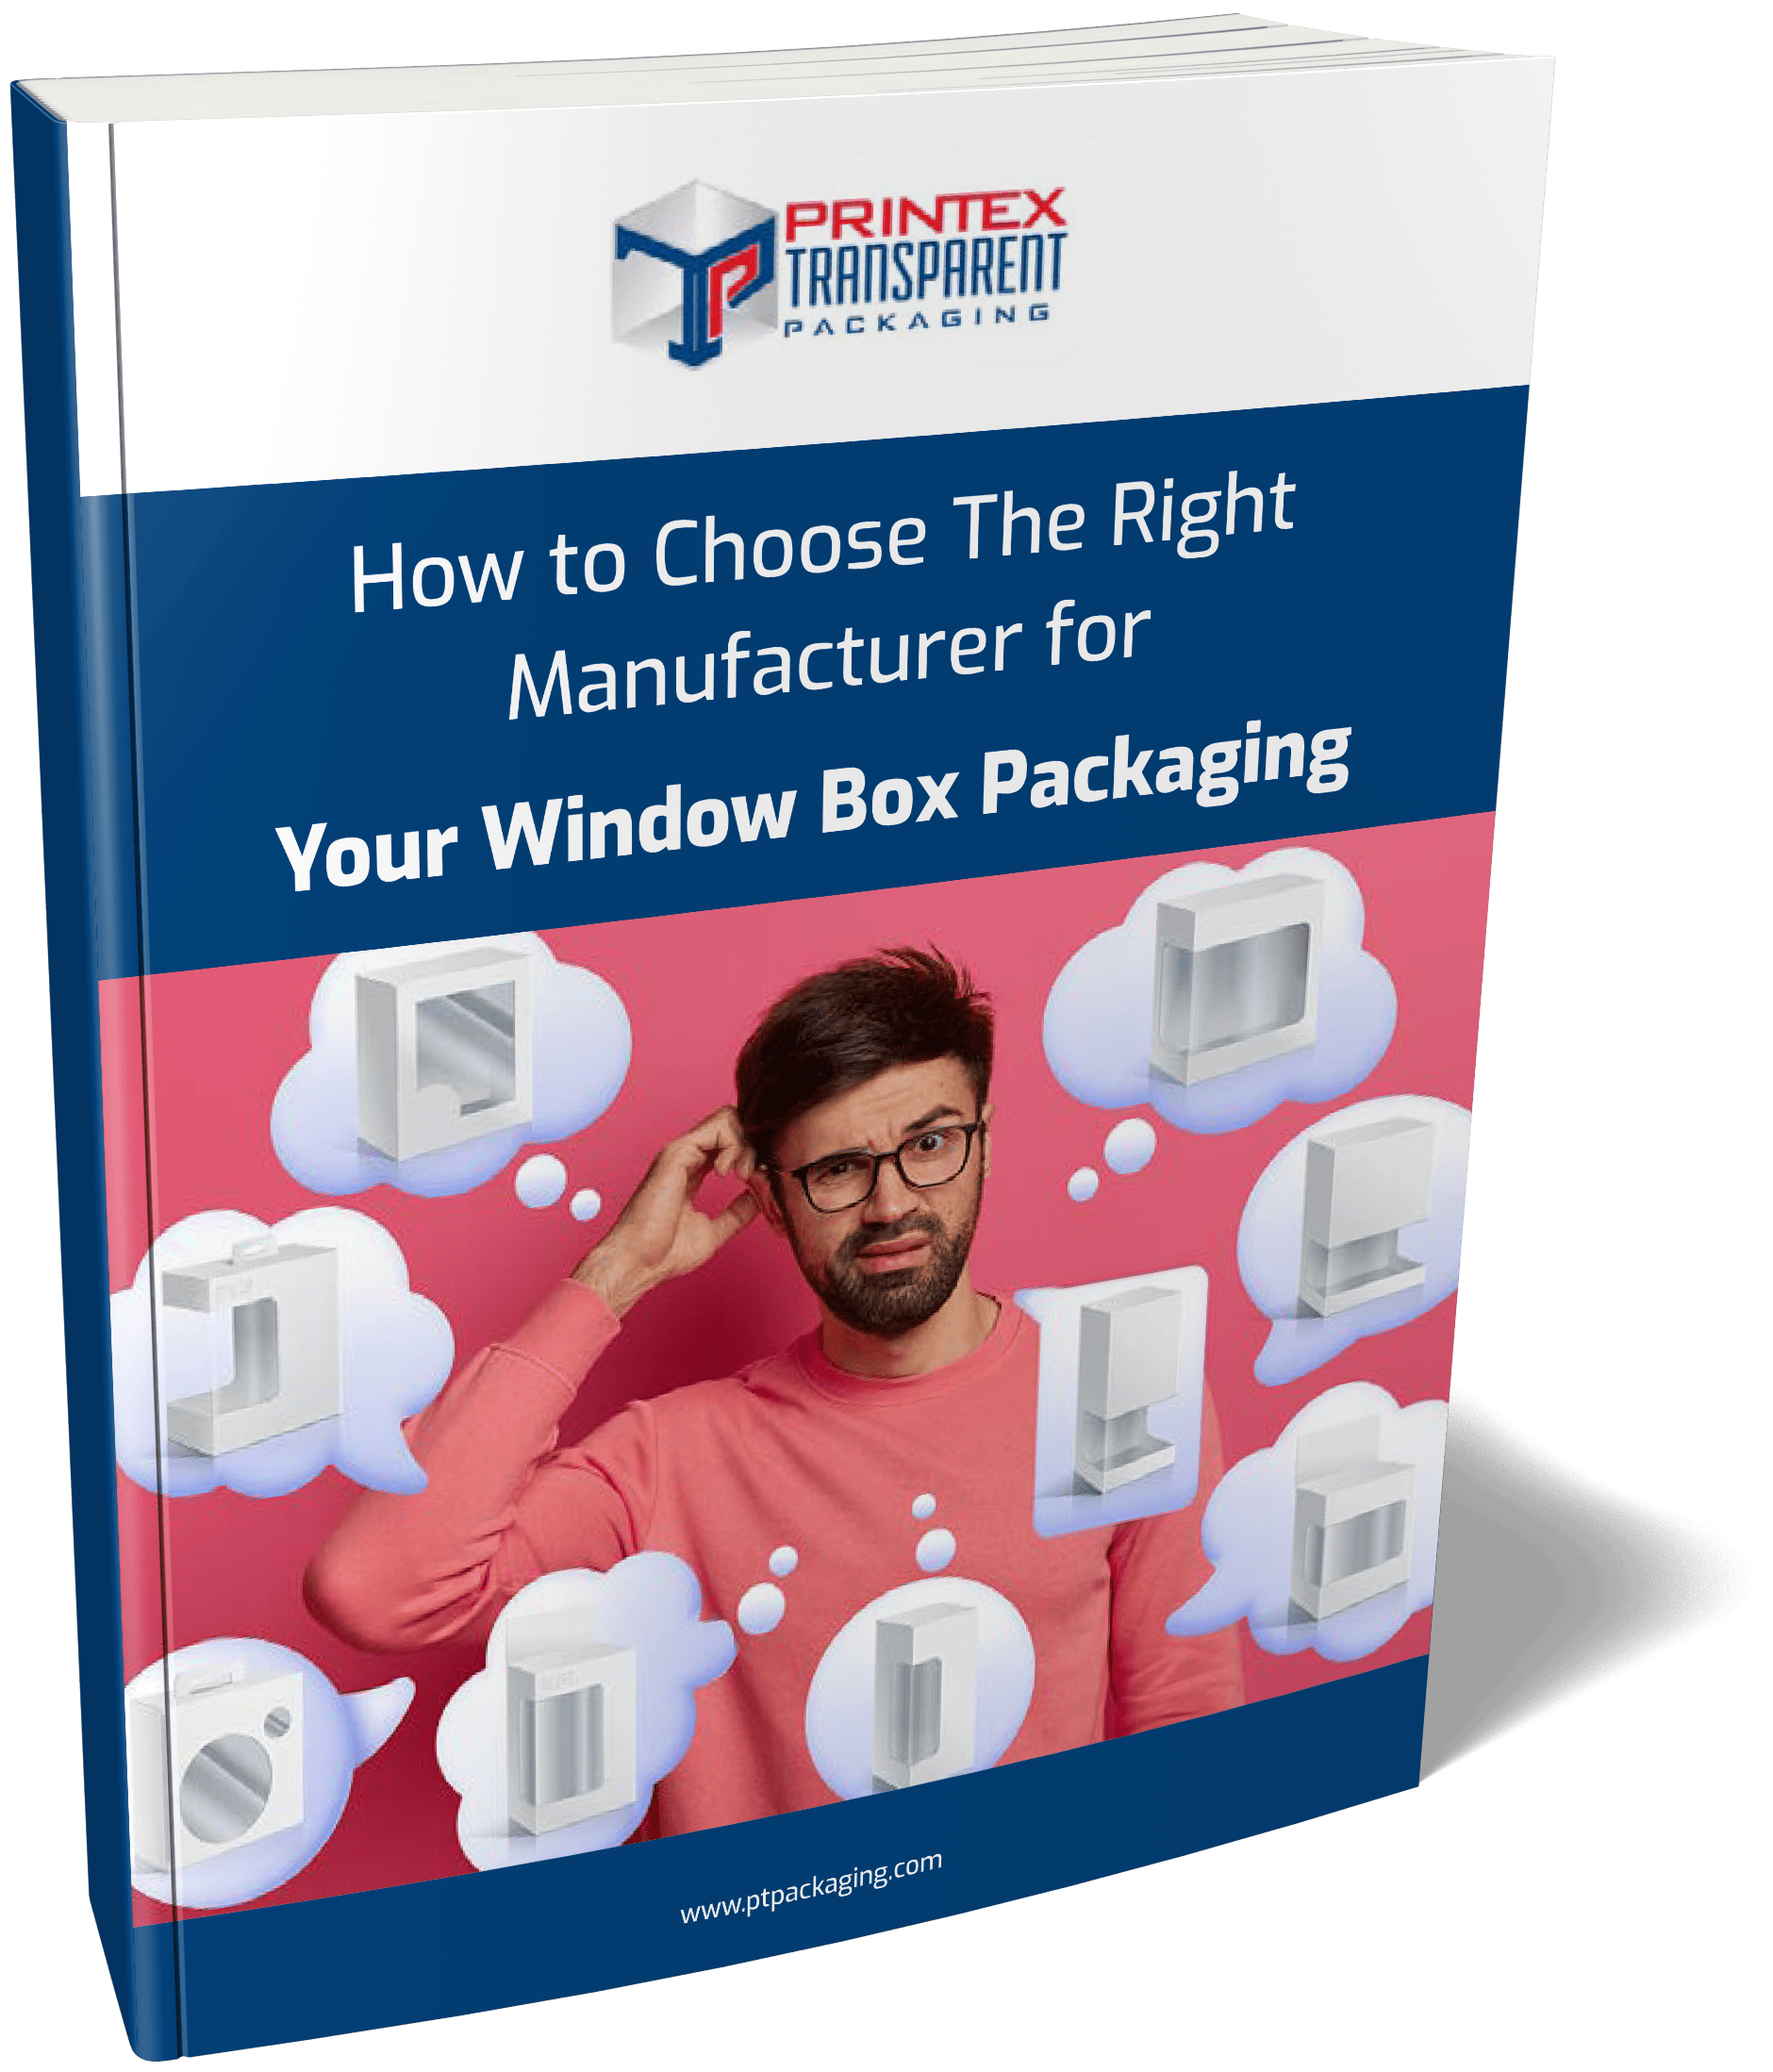 How to Choose The Right Manufacturer for Your Window Box Packaging